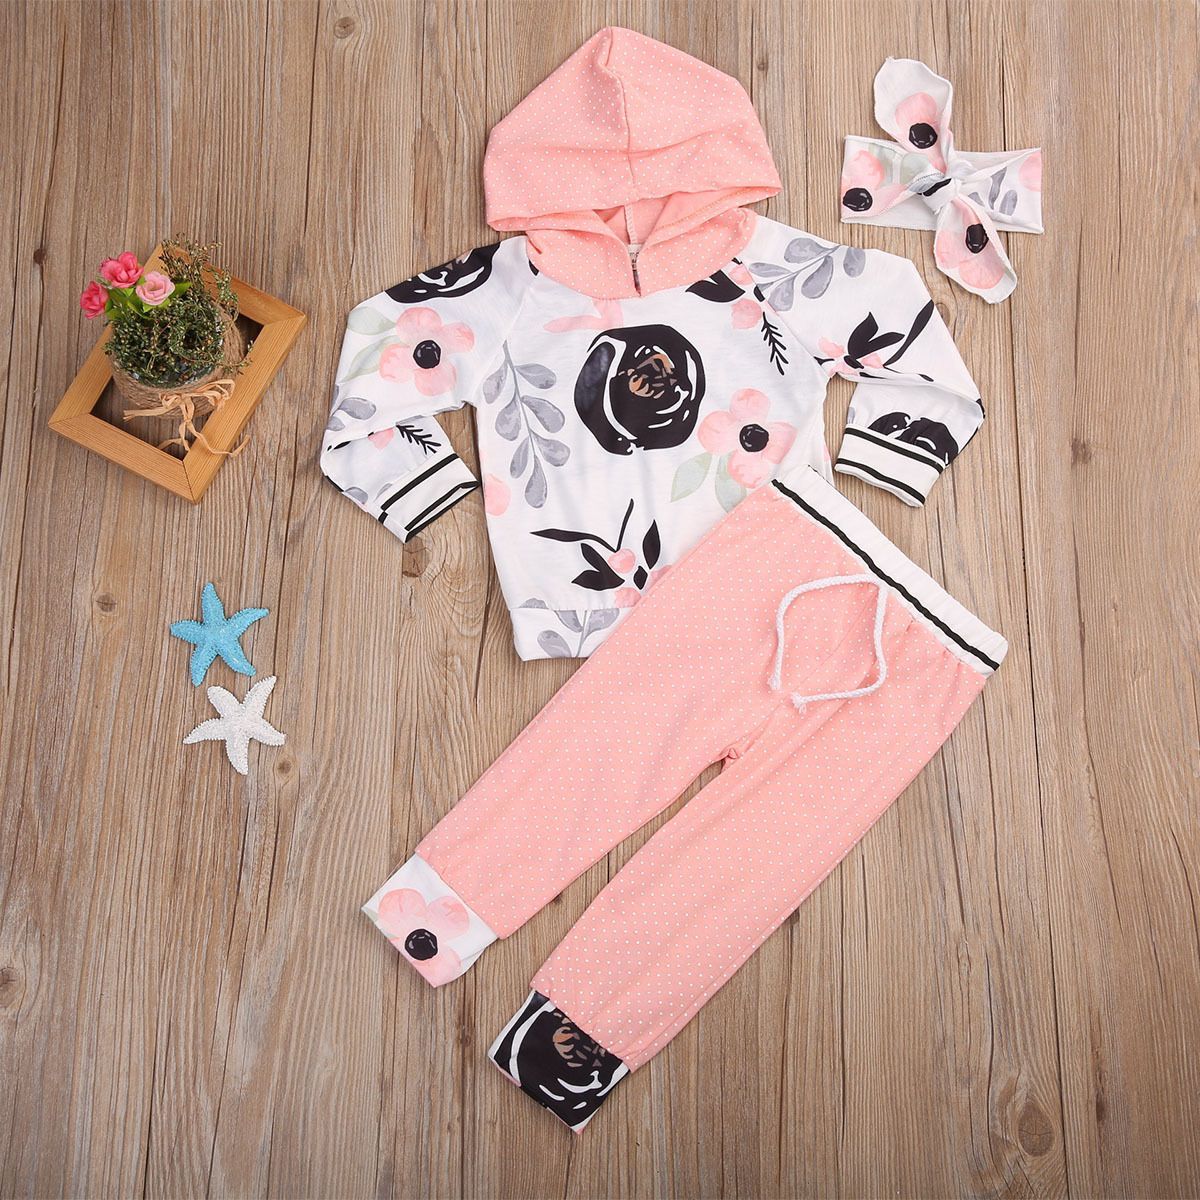 0-36M Newborn Baby Kid Girls Floral Tops Hooded Clothes +Long Pants Outfits Set - ebowsos